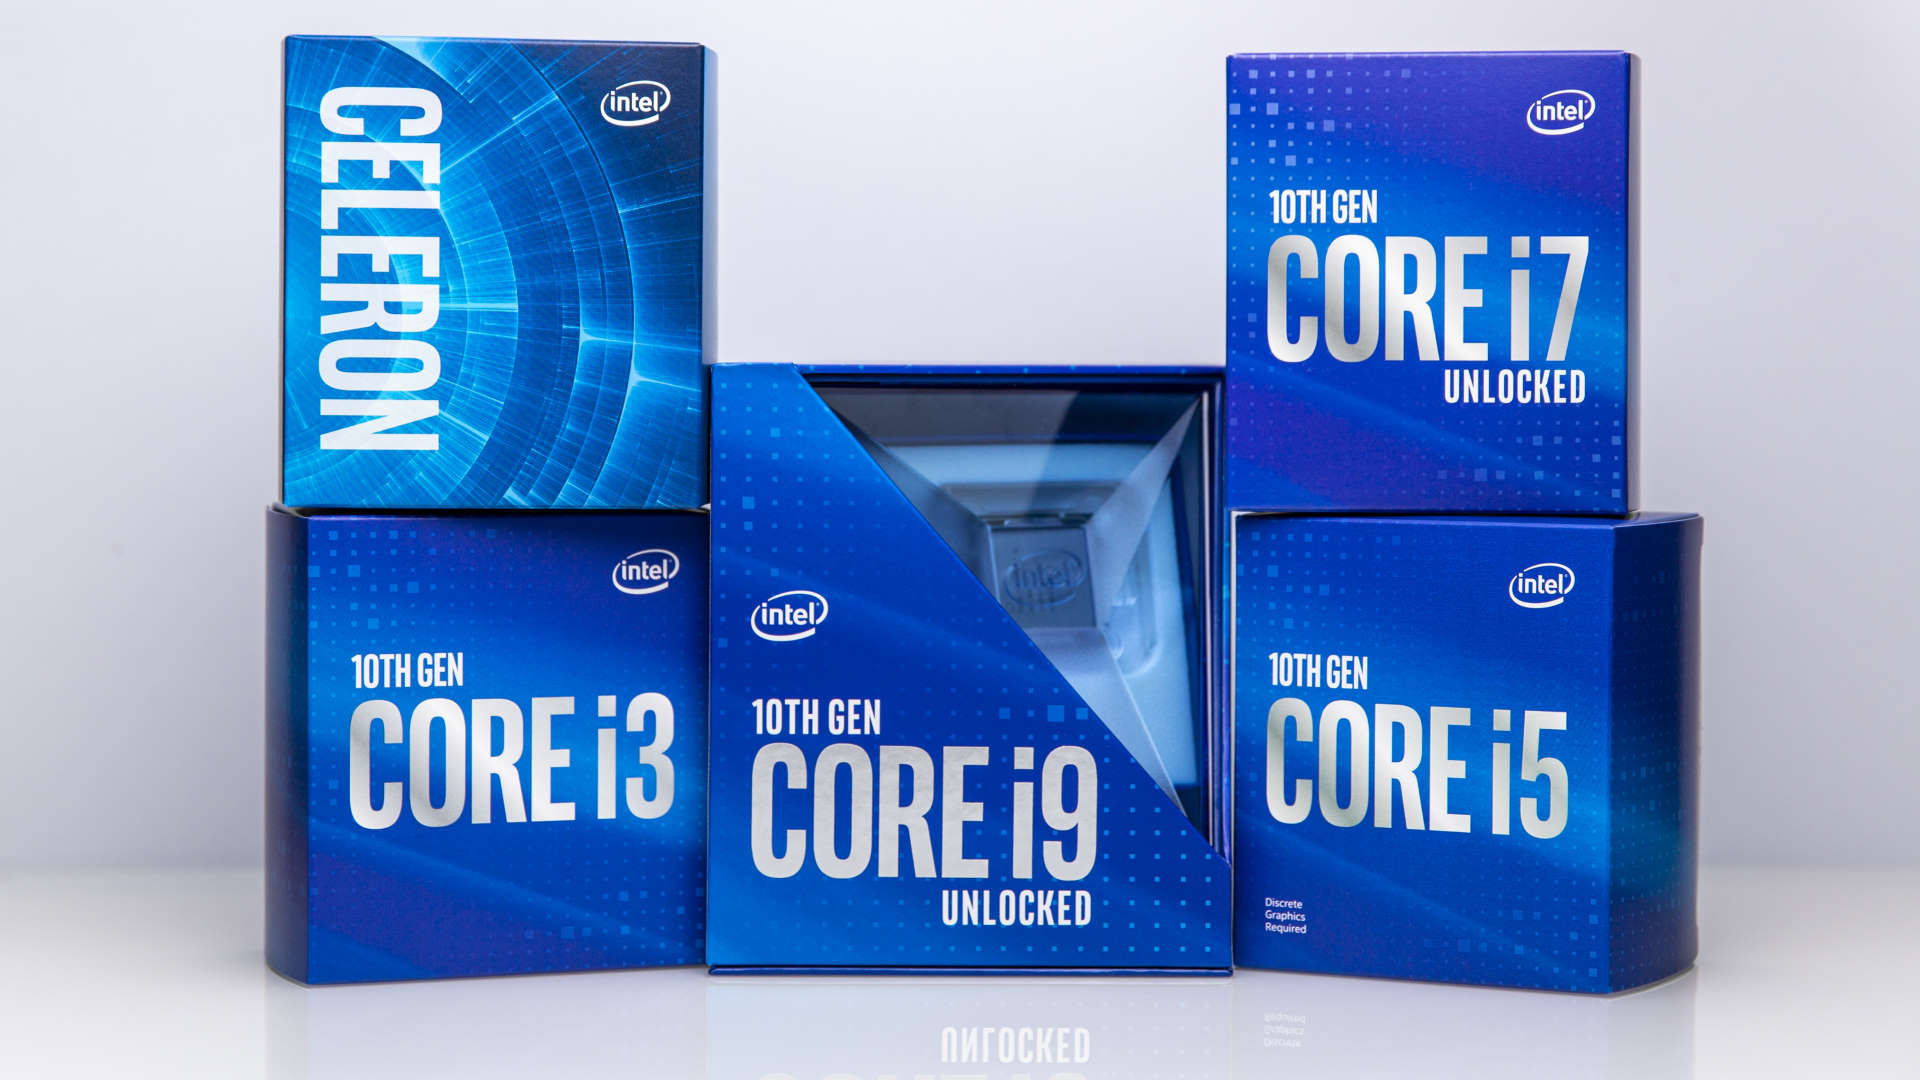 Intel Comet Lake 10th Gen CPU release date, specs, price, and performance |  PC Gamer